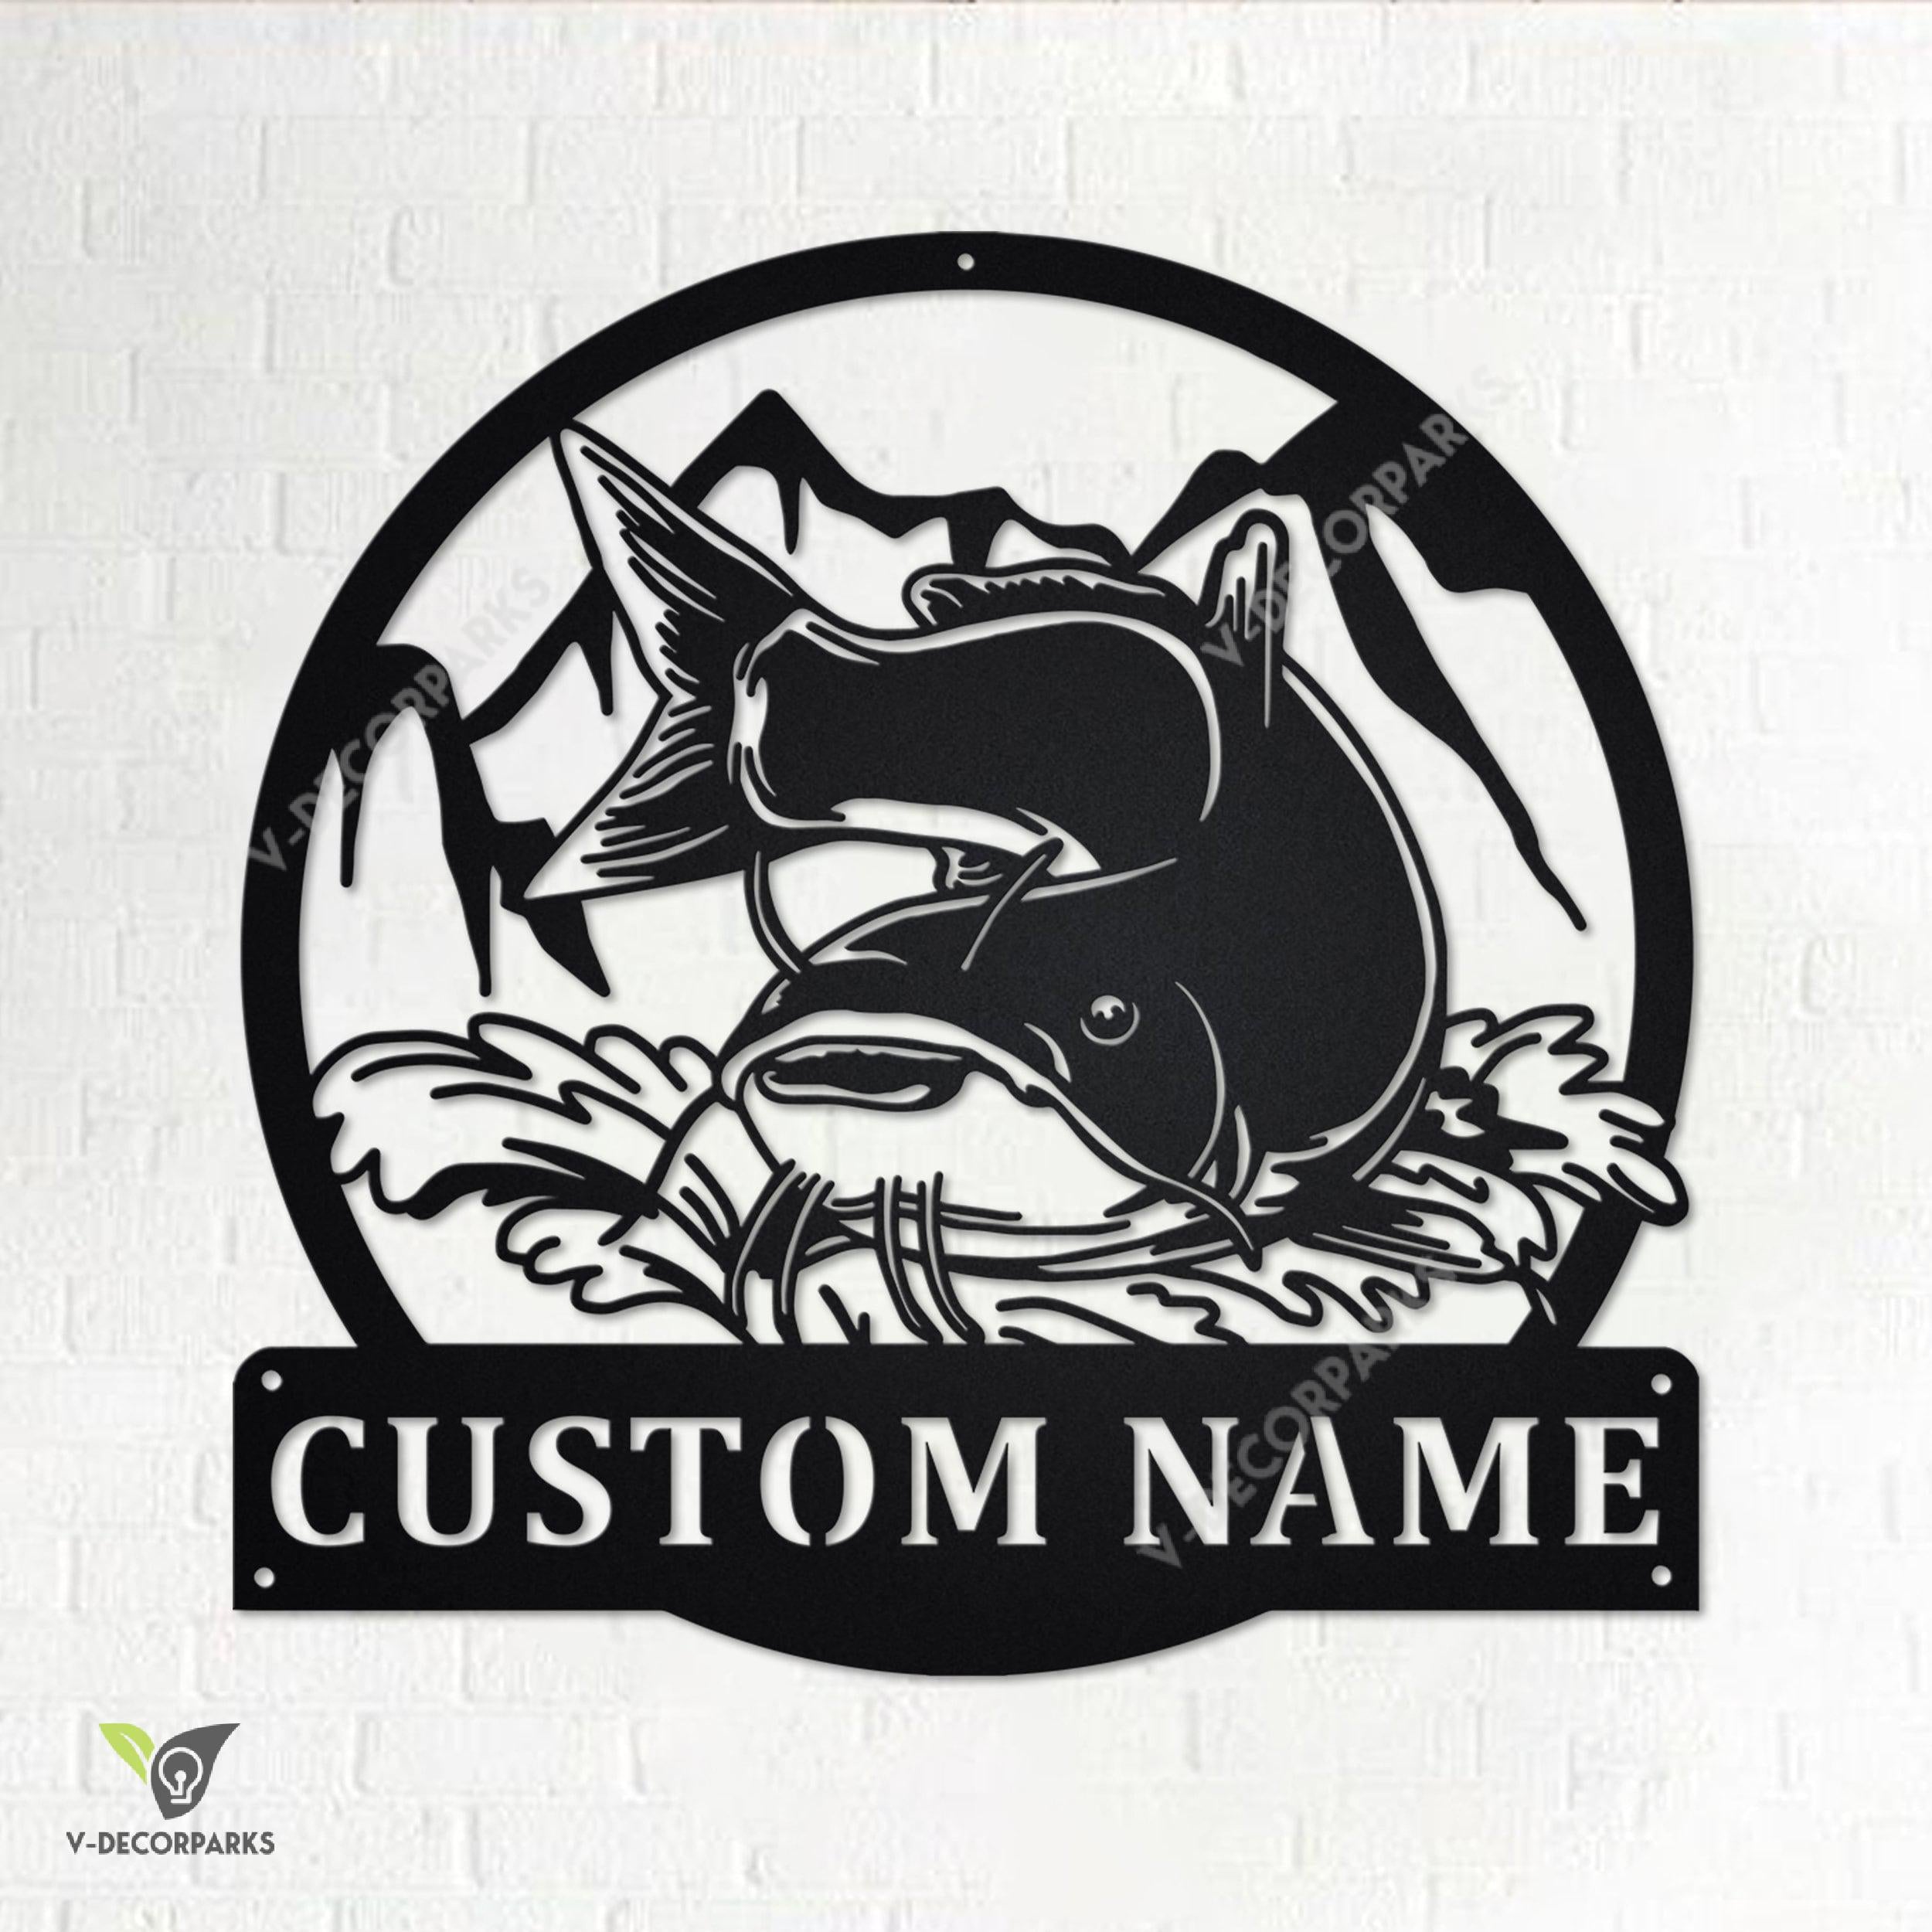 Custom Catfish Fishing Metal Wall Art, Personalized Catfish Name Sign Decoration For Room, Catfish Home Decor, Custom Catfish,fisherman Gift